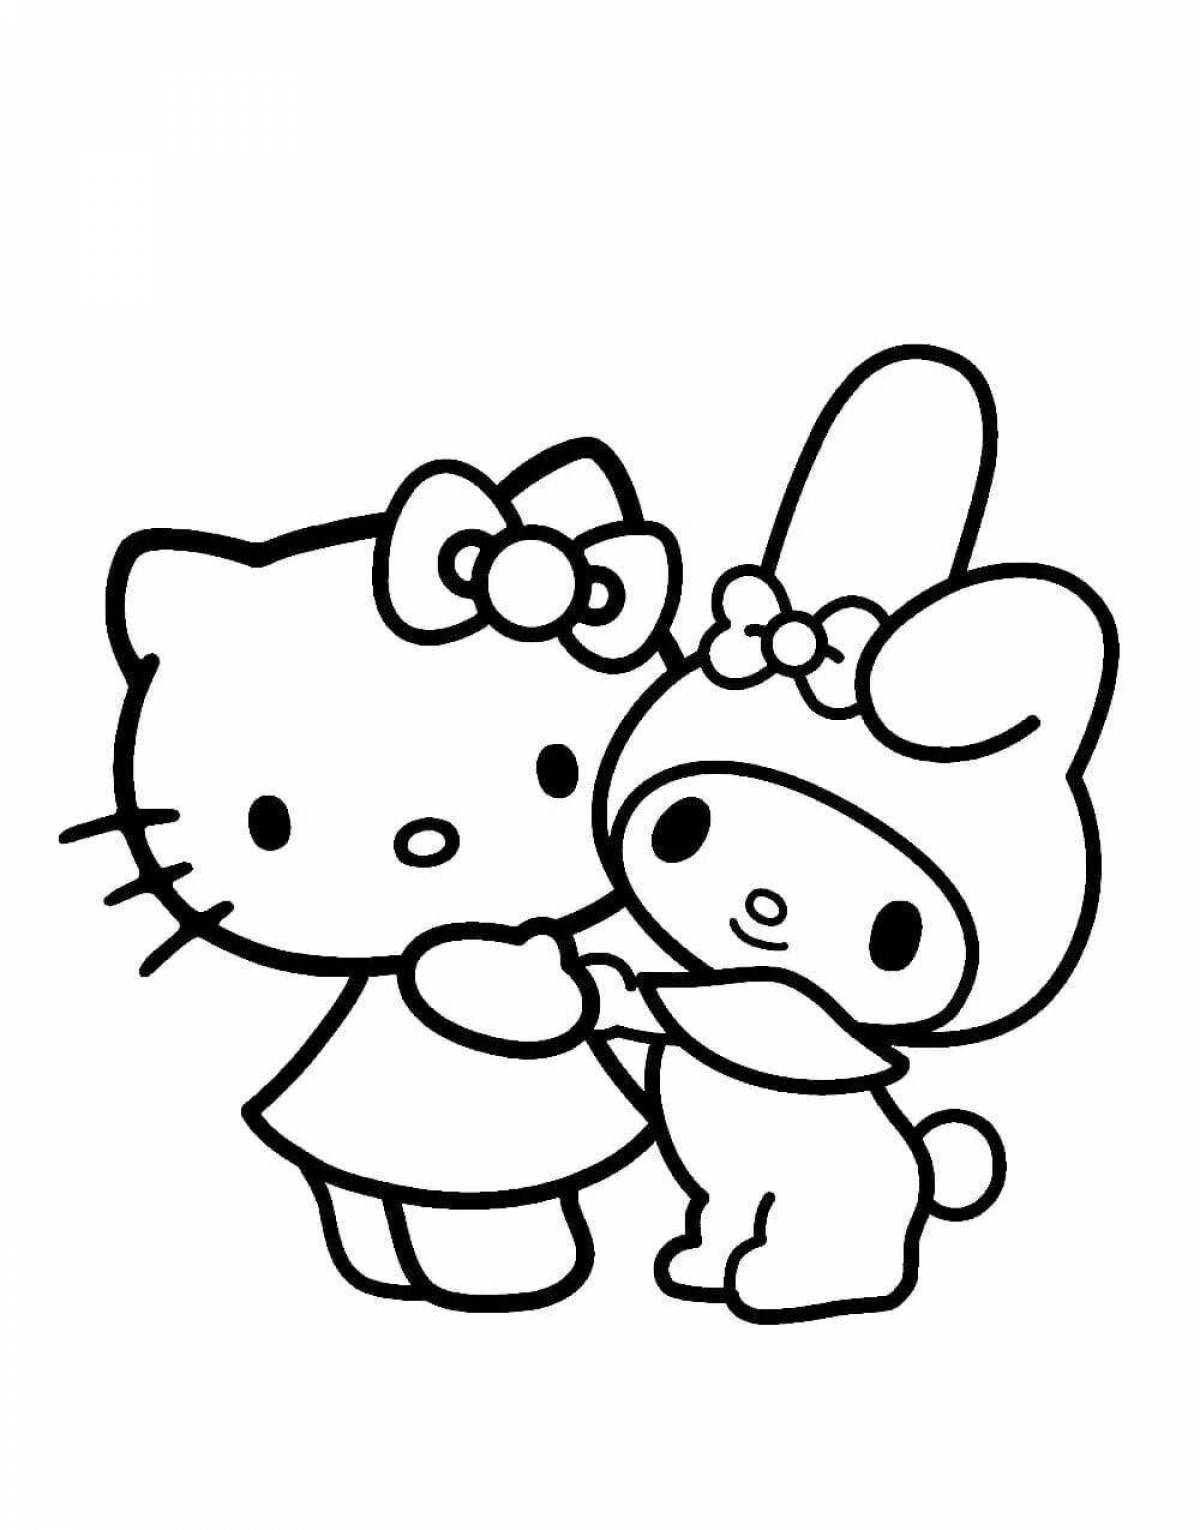 Milady's hello kitty wild coloring book